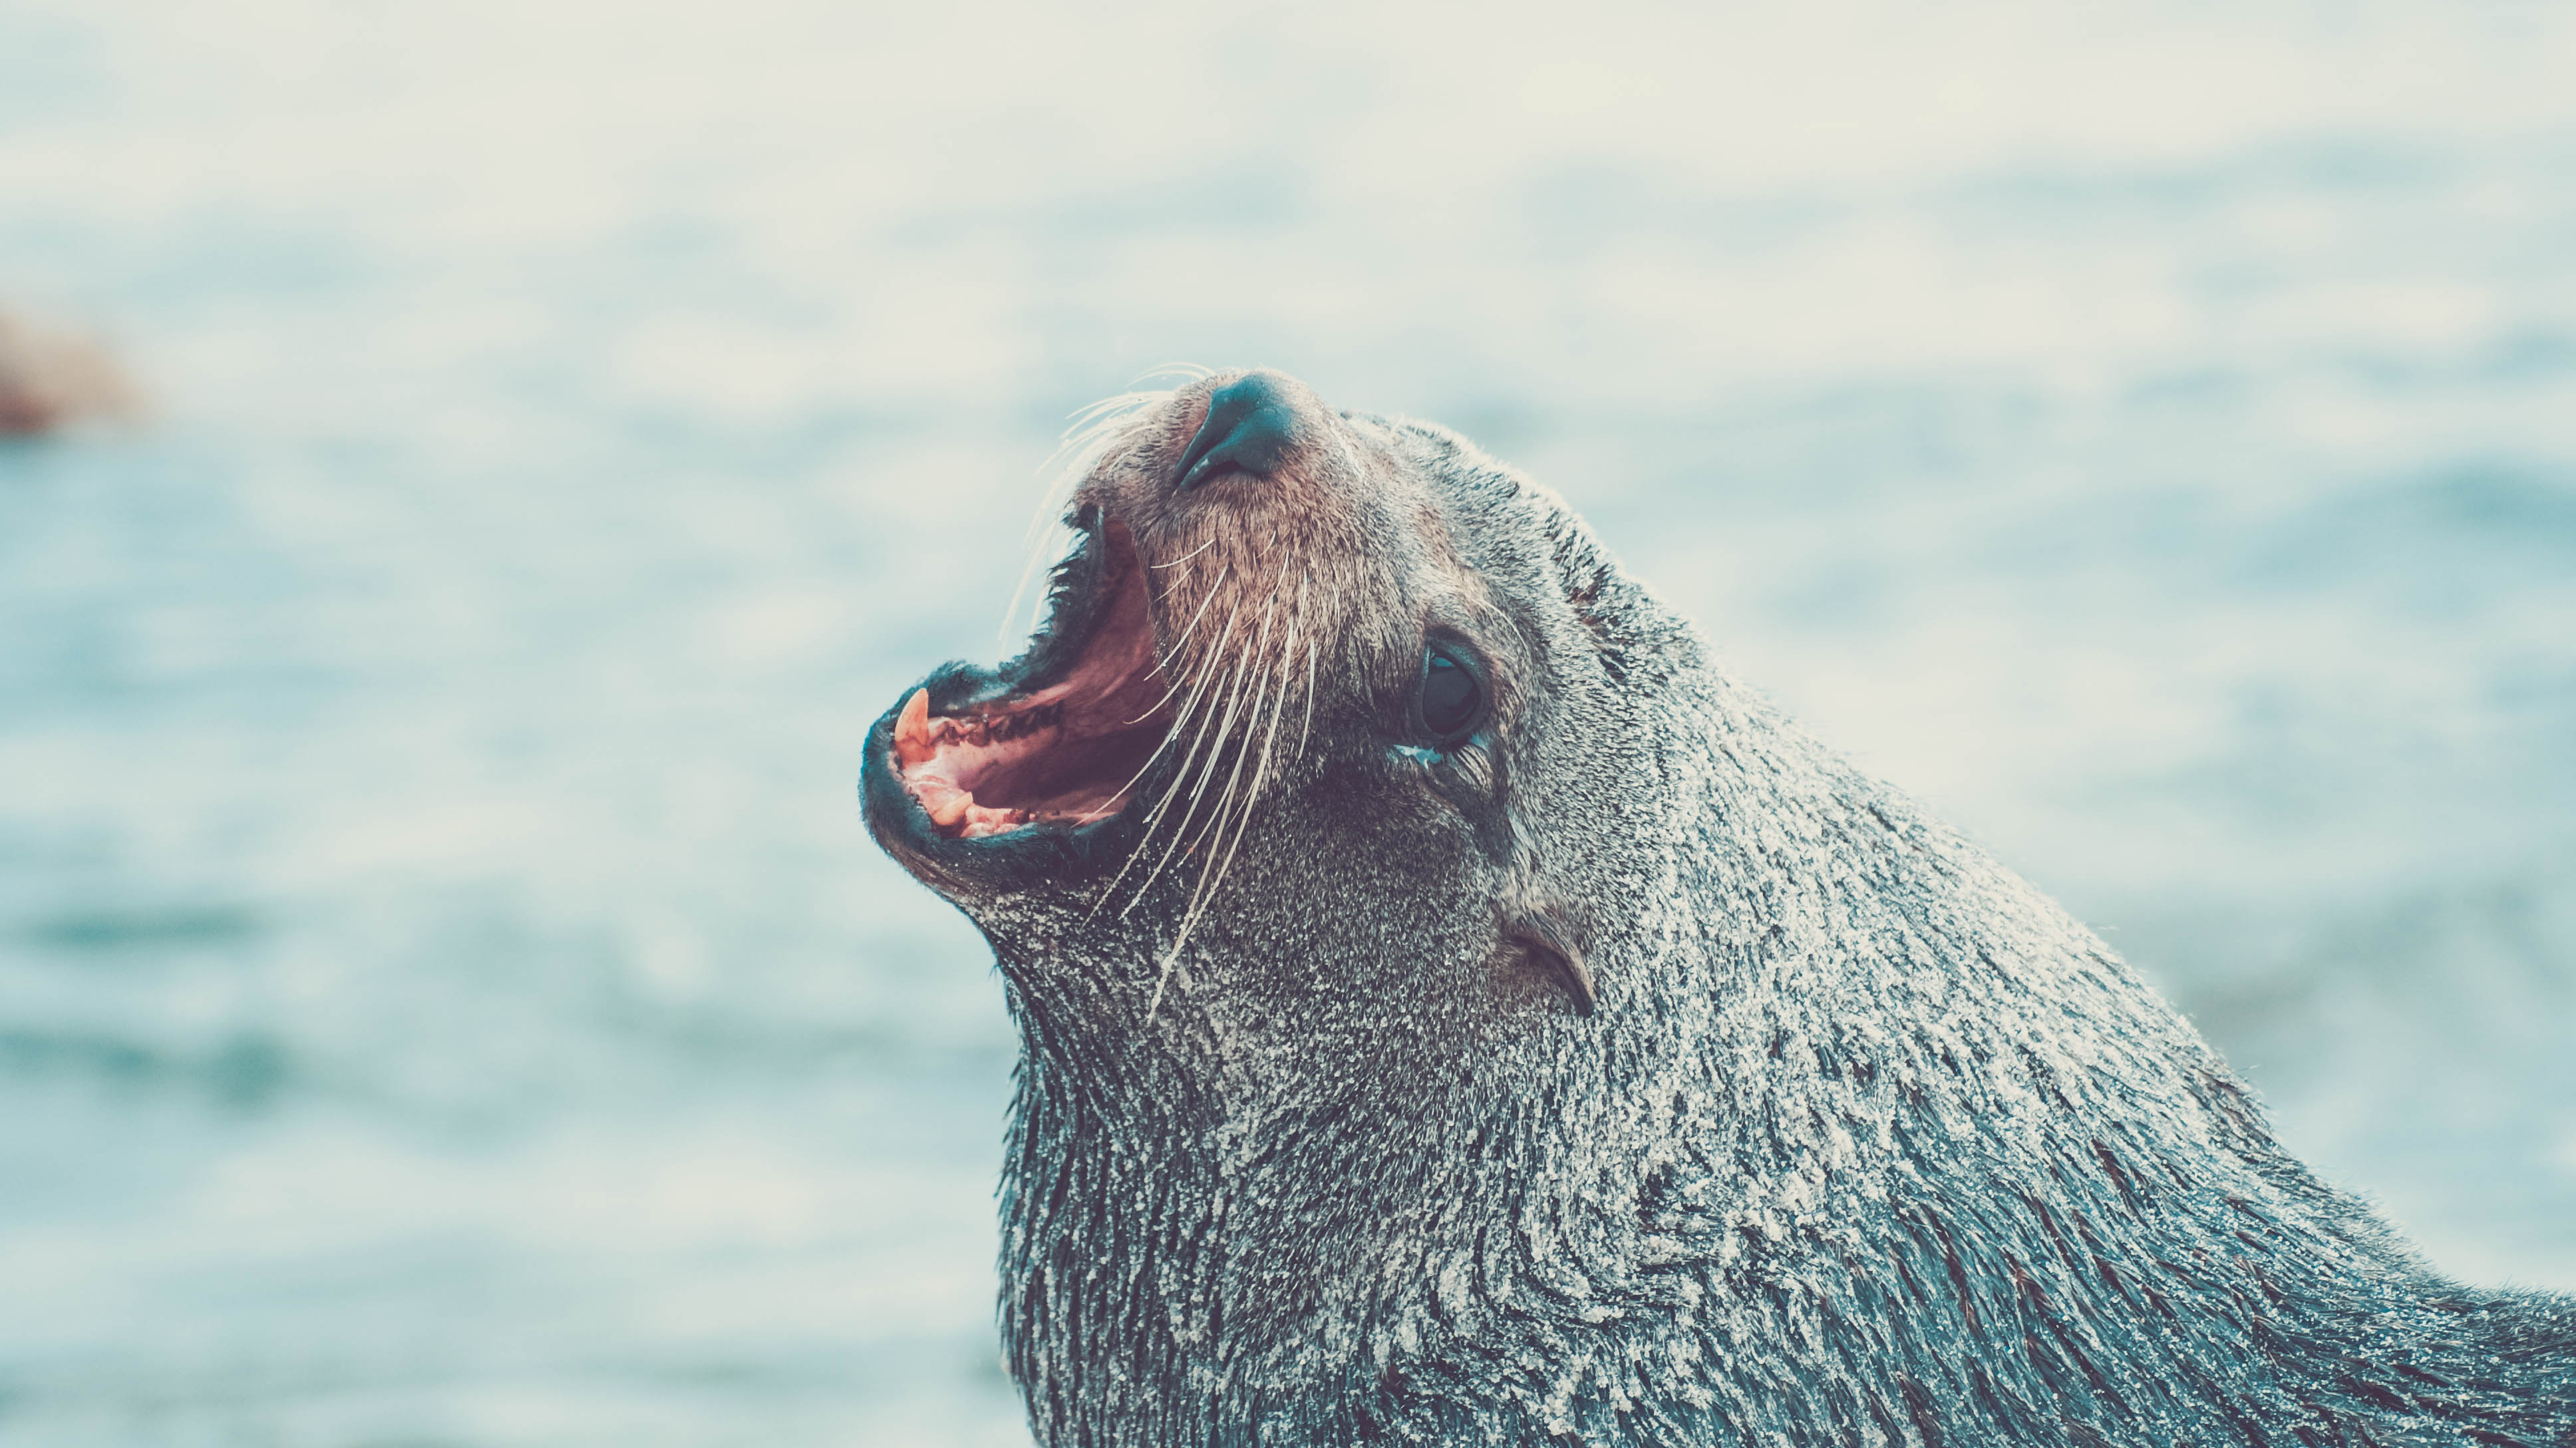 141560 Screensavers and Wallpapers Scream for phone. Download animals, water, muzzle, scream, cry, fur seal pictures for free